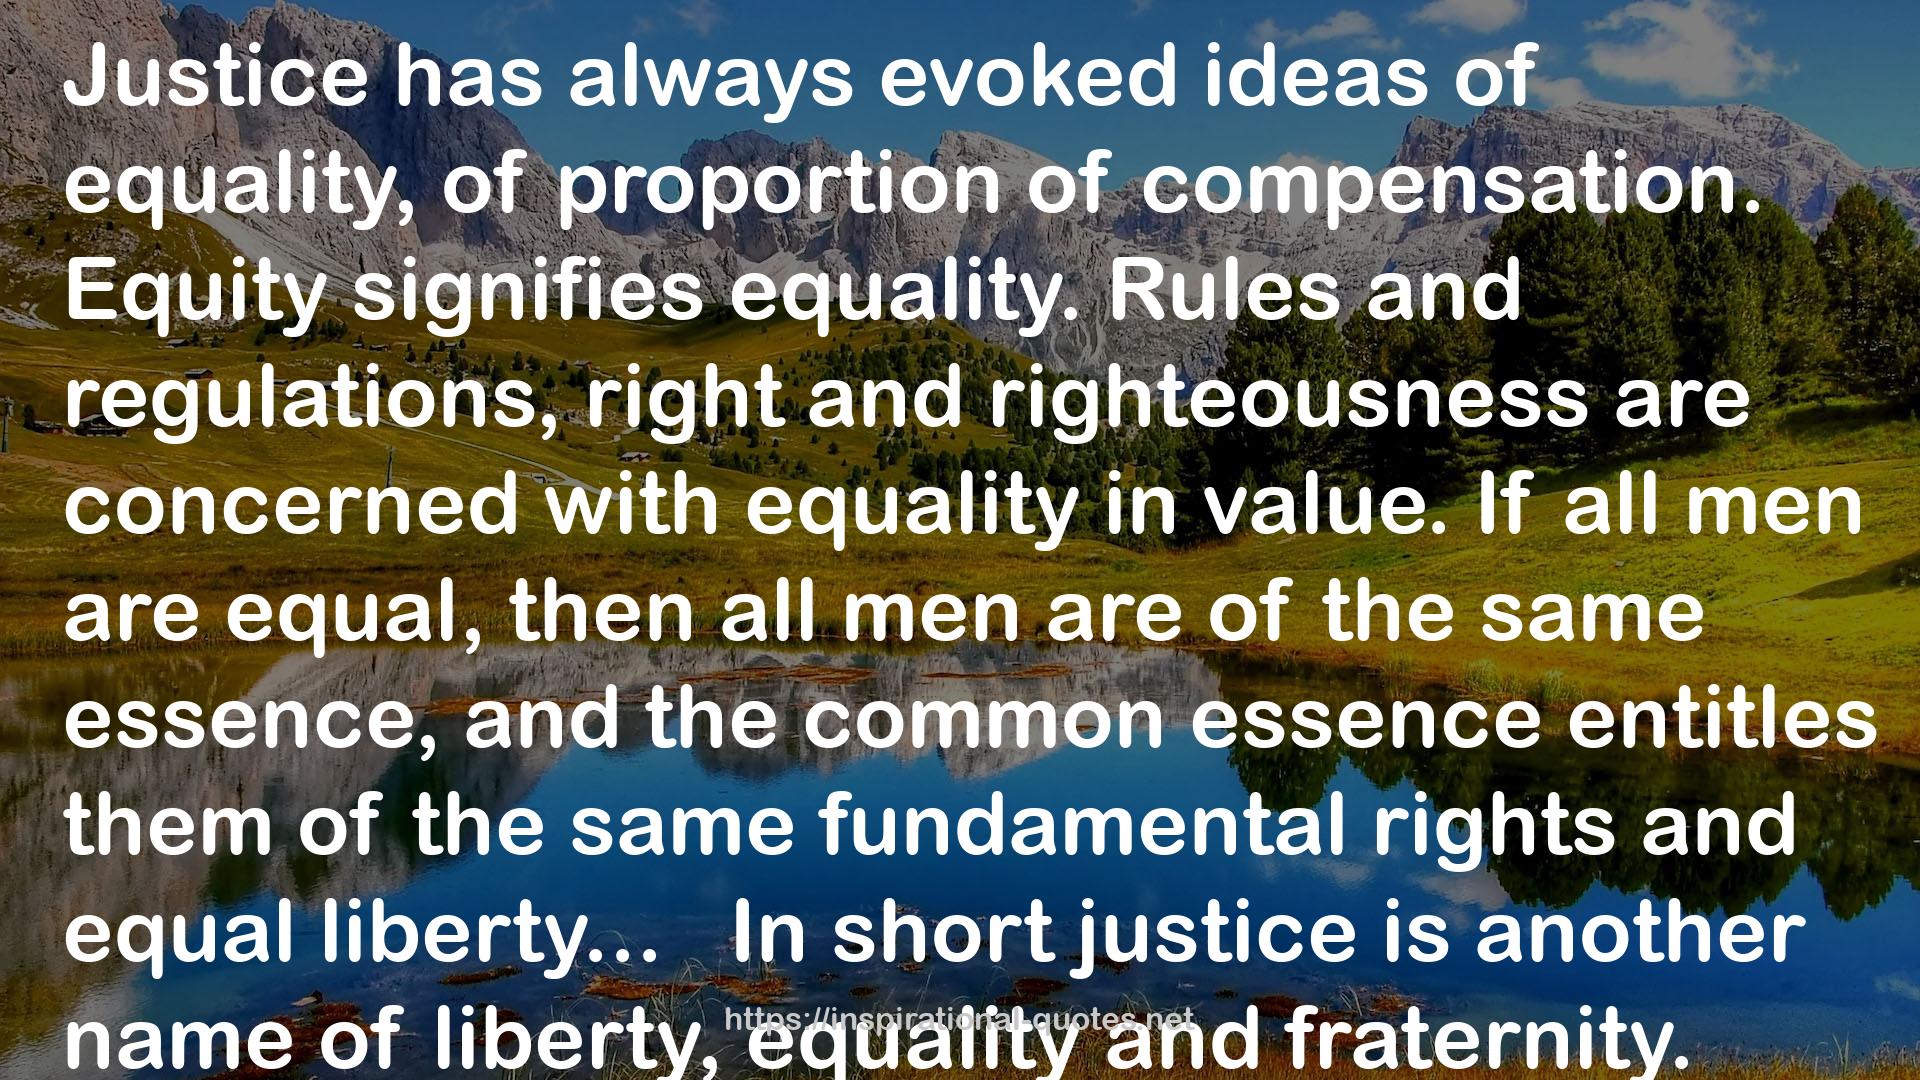 the same fundamental rights  QUOTES